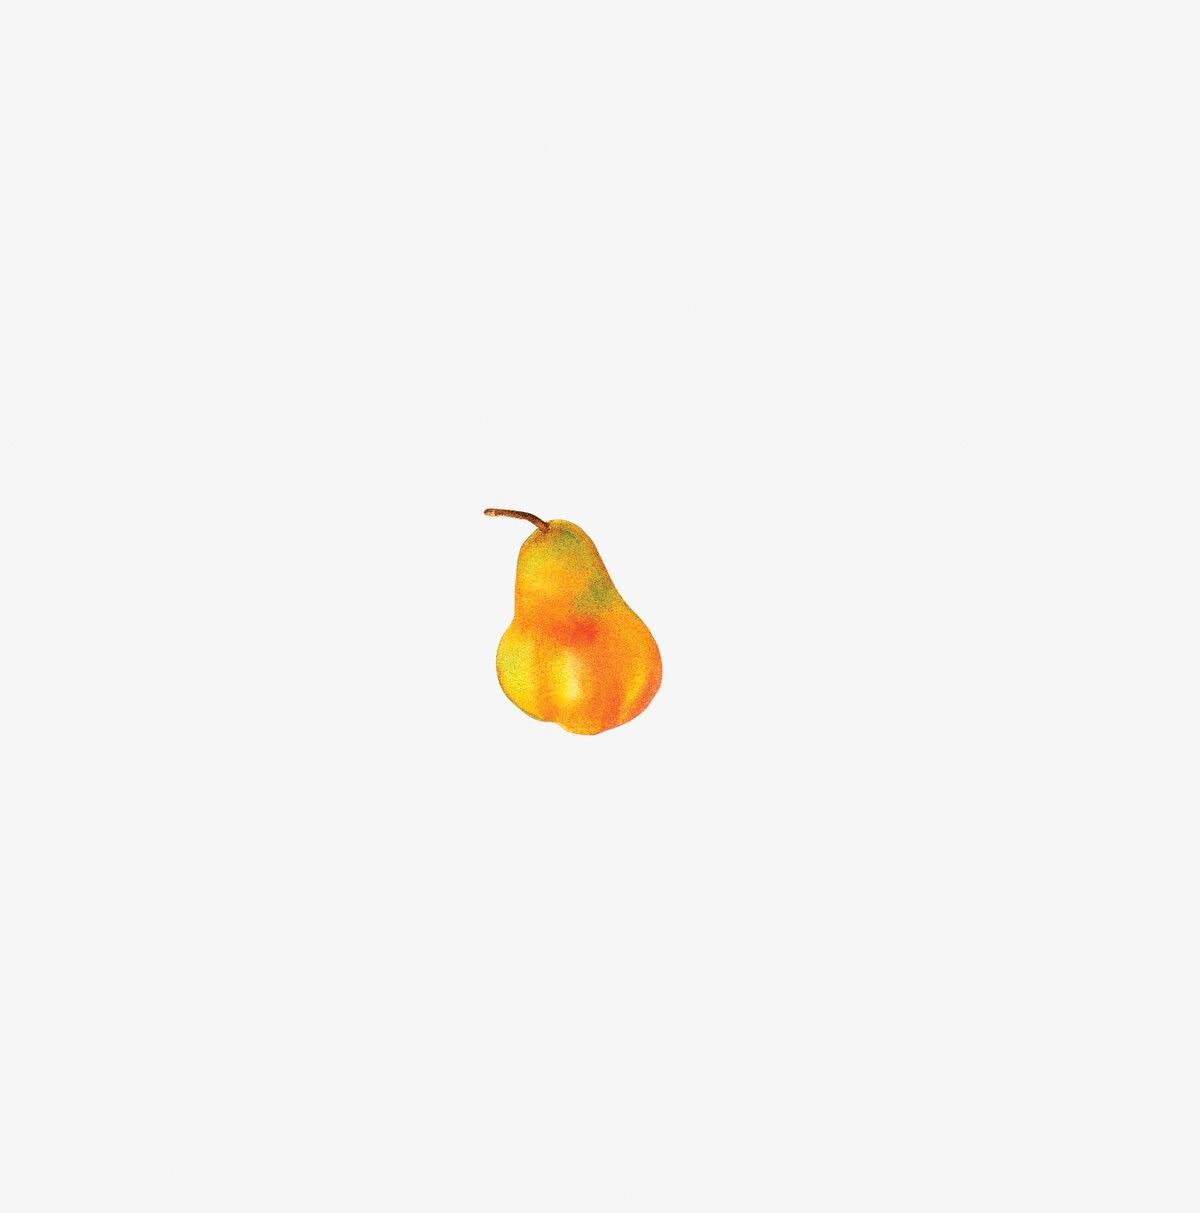 A ripe pear with a red and yellow gradient, centered against a plain white background, resembling Cover-Alls' Thanksgiving Cornucopia Decals.